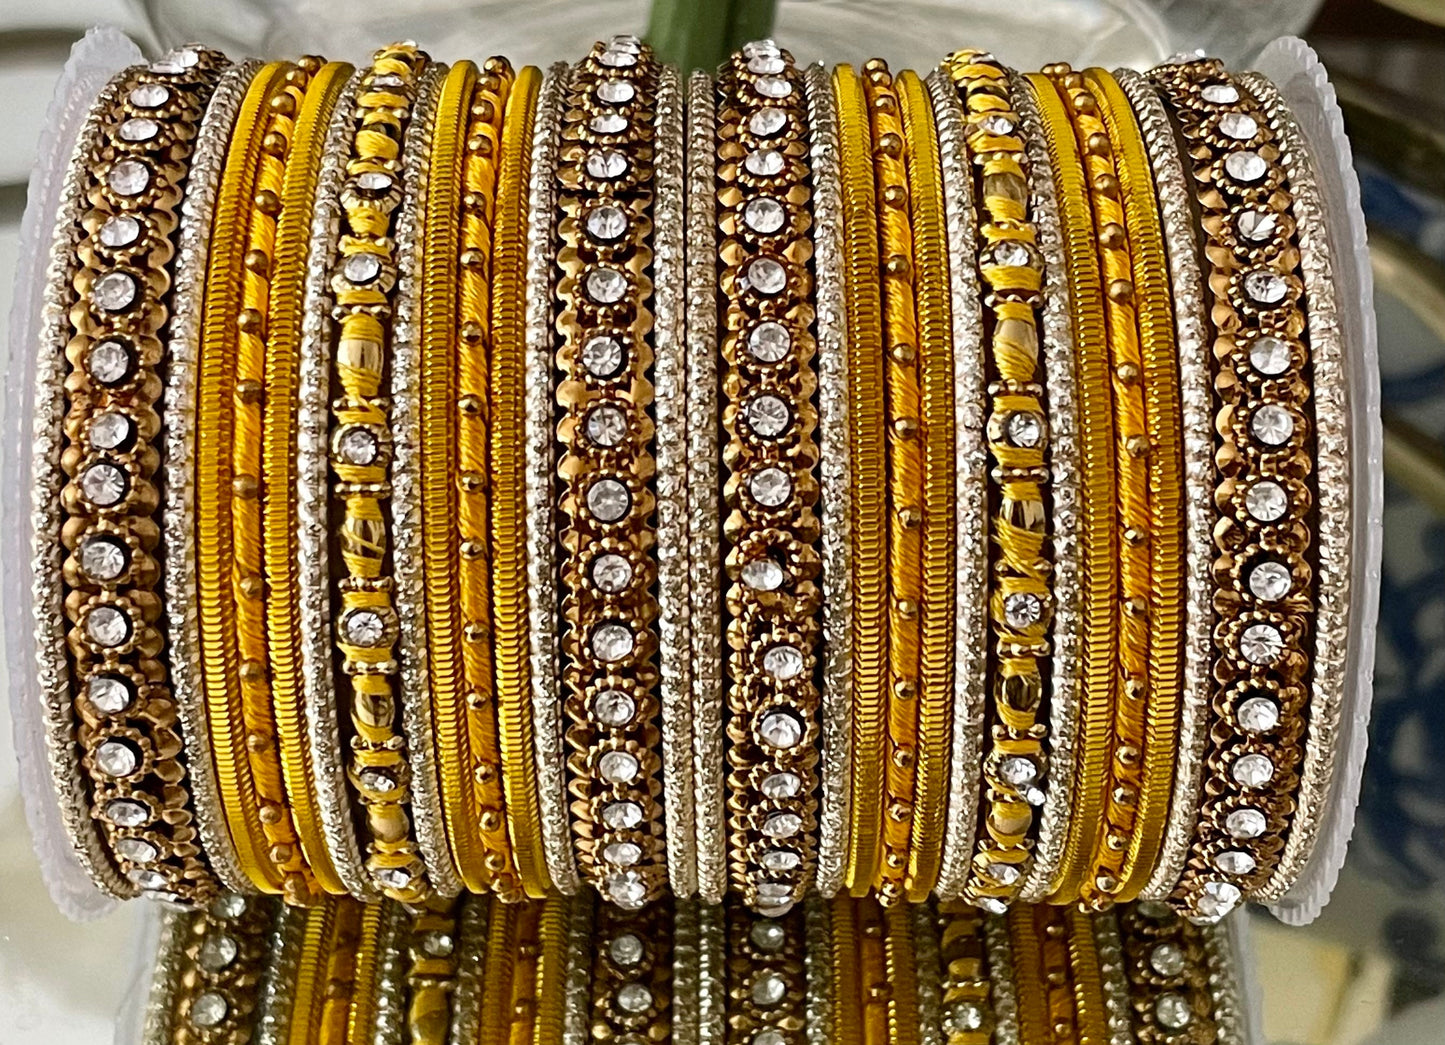 Bangle Stack for two hands| Thread Diamante Bangles Jewellery Bridal Bangle Stack Wedding| Indian Jewellery